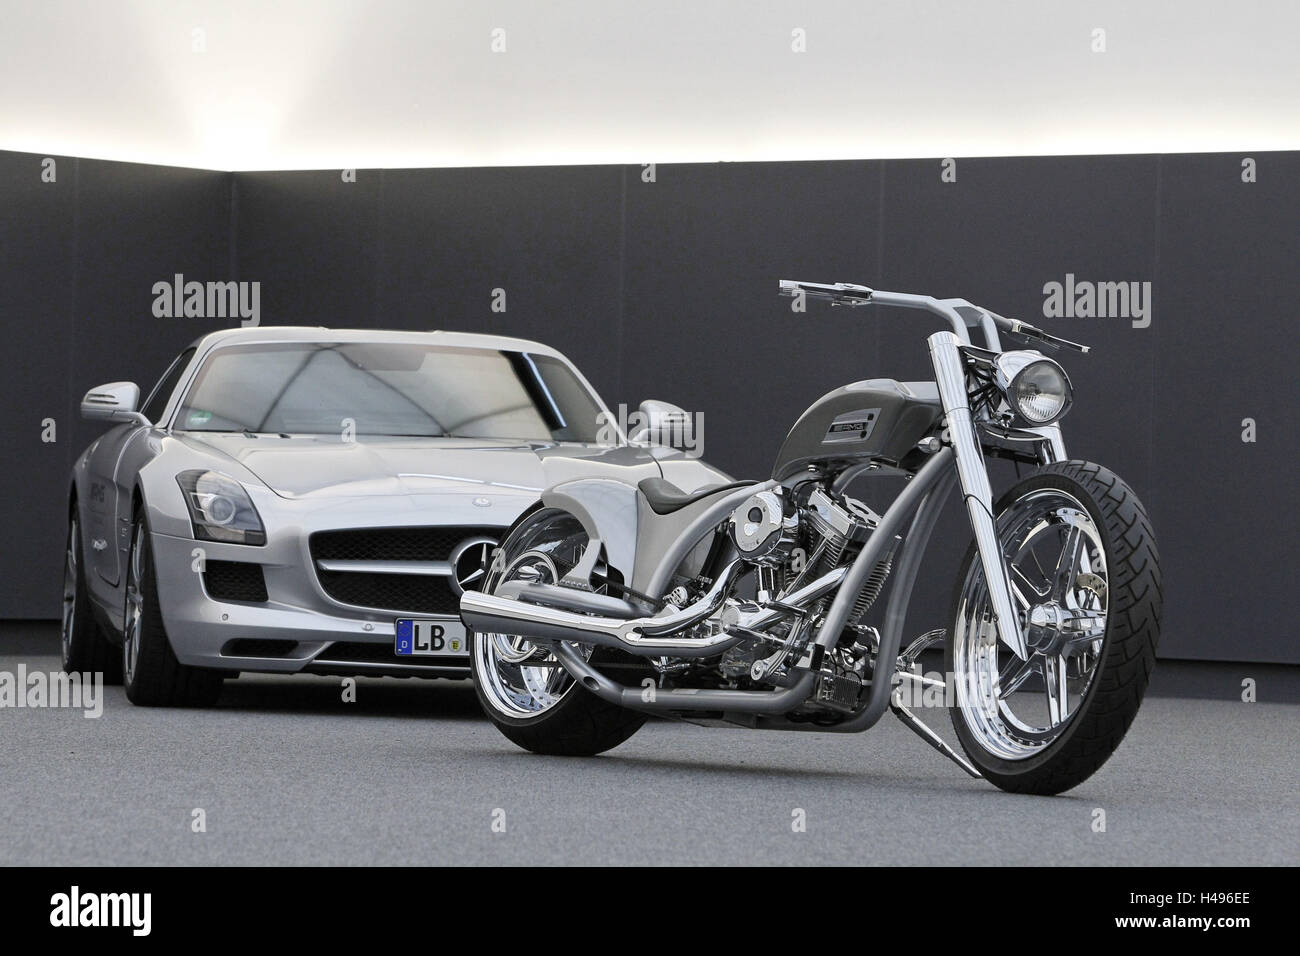 Motorcycle, chopper AMG by car, Mercedes AMG Wing door model SLS, silver, Stock Photo